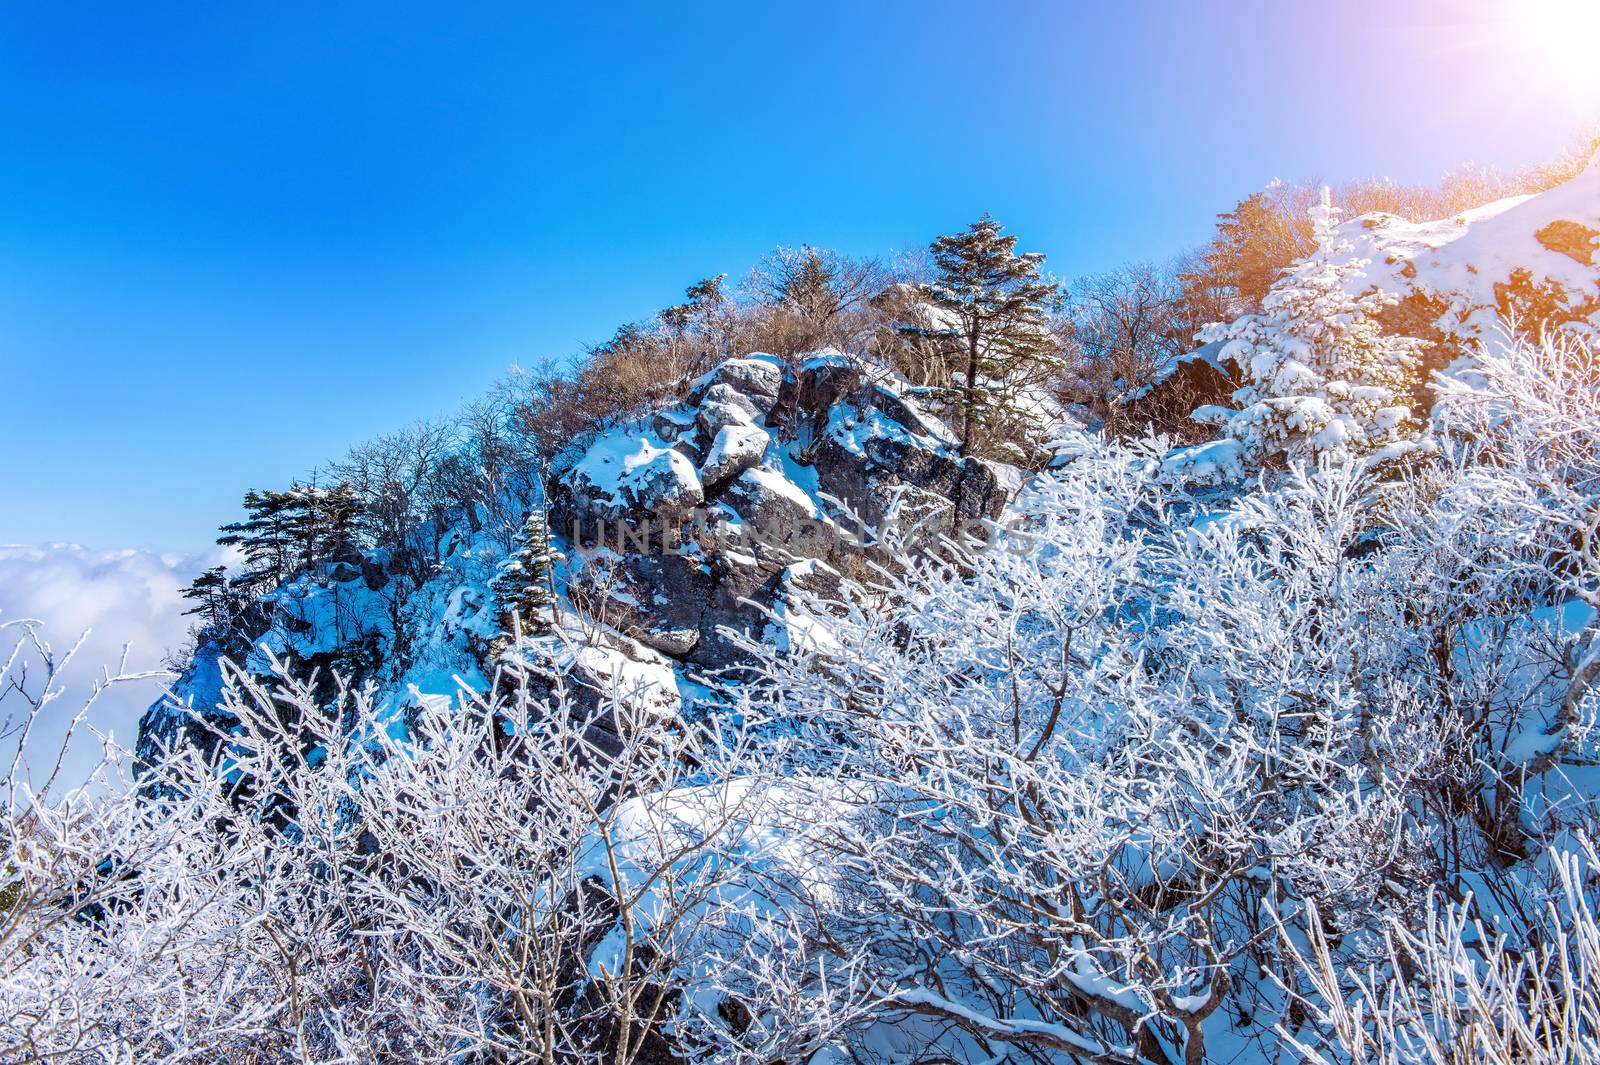 Seoraksan mountains is covered by snow in winter, Korea.